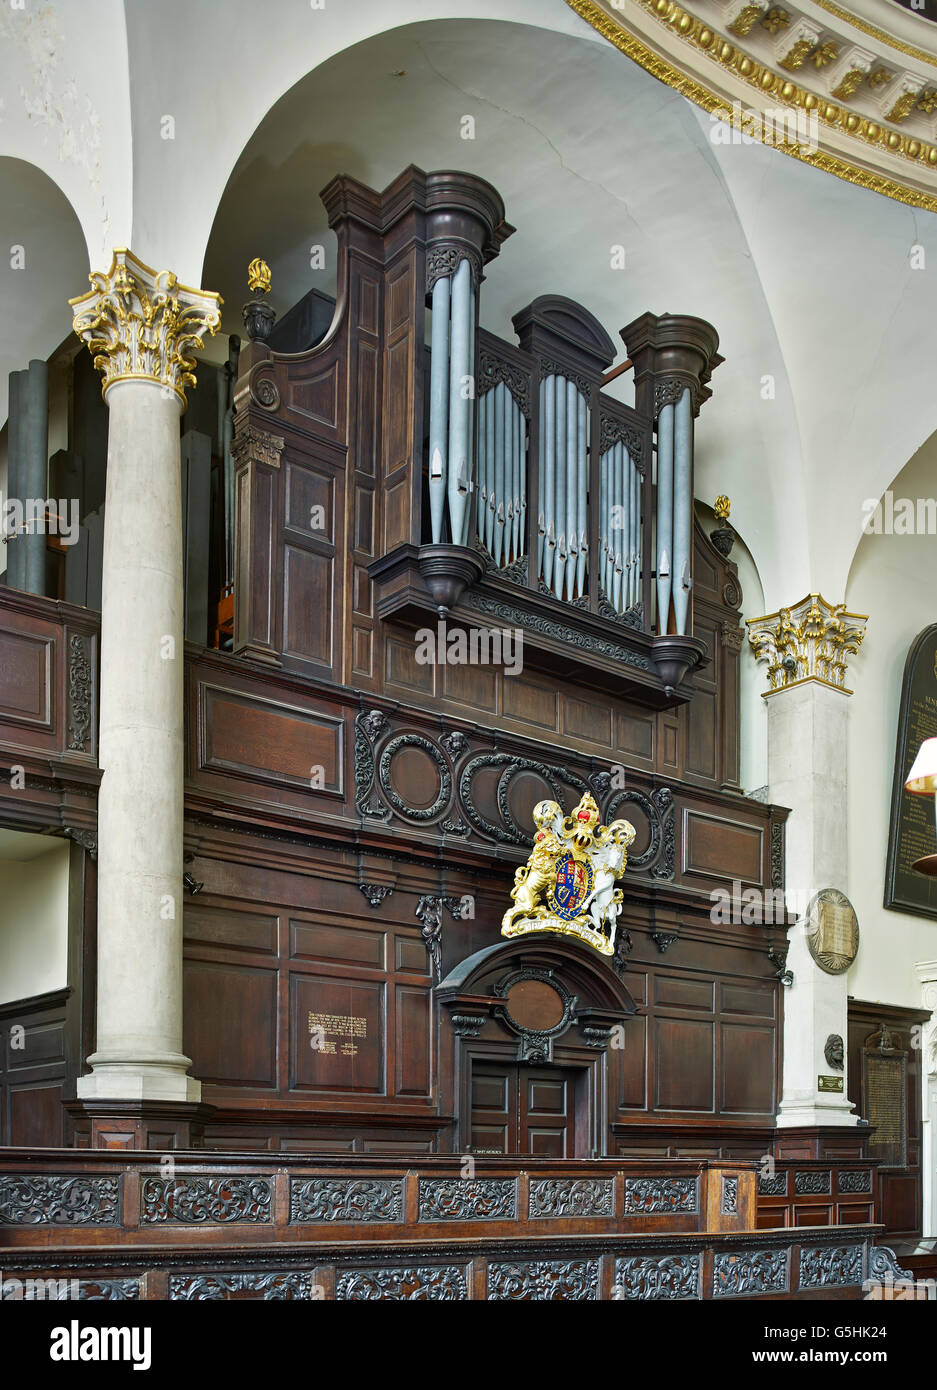 St Martin within Ludgate, church in the City of London, organ from All Hallows Bread Street Stock Photo